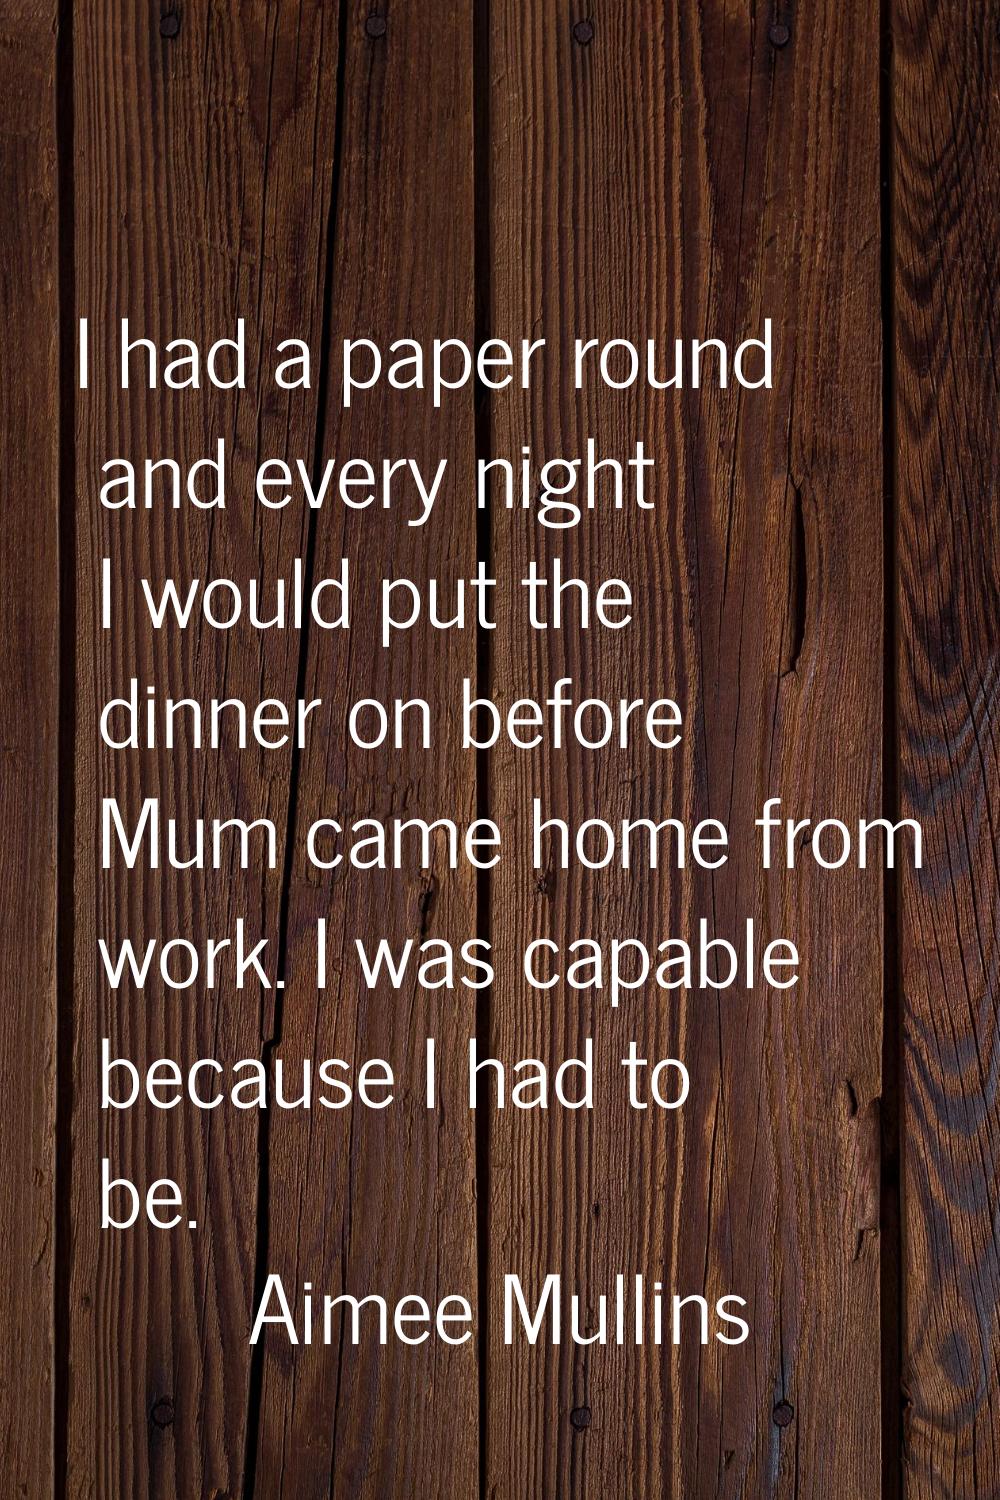 I had a paper round and every night I would put the dinner on before Mum came home from work. I was